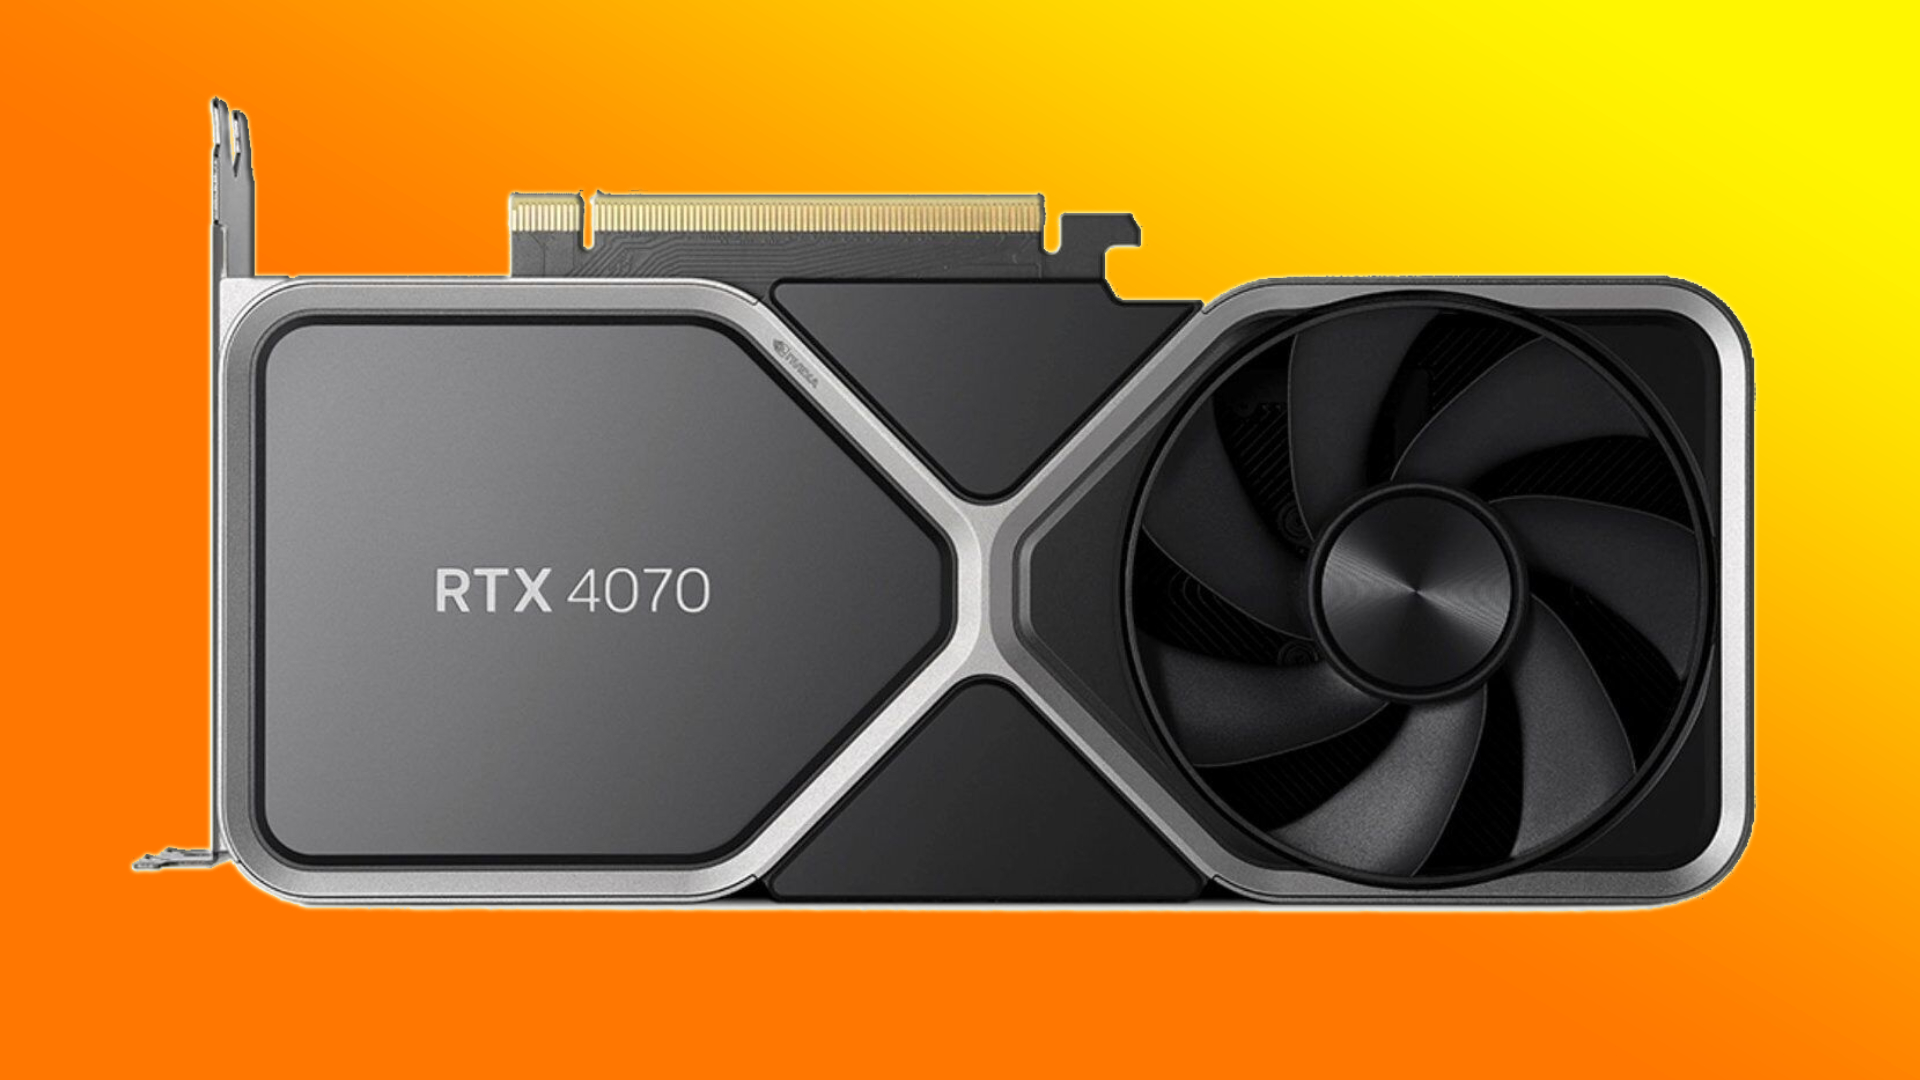 Nvidia GeForce RTX 4070 might not be replaced by new Super variant